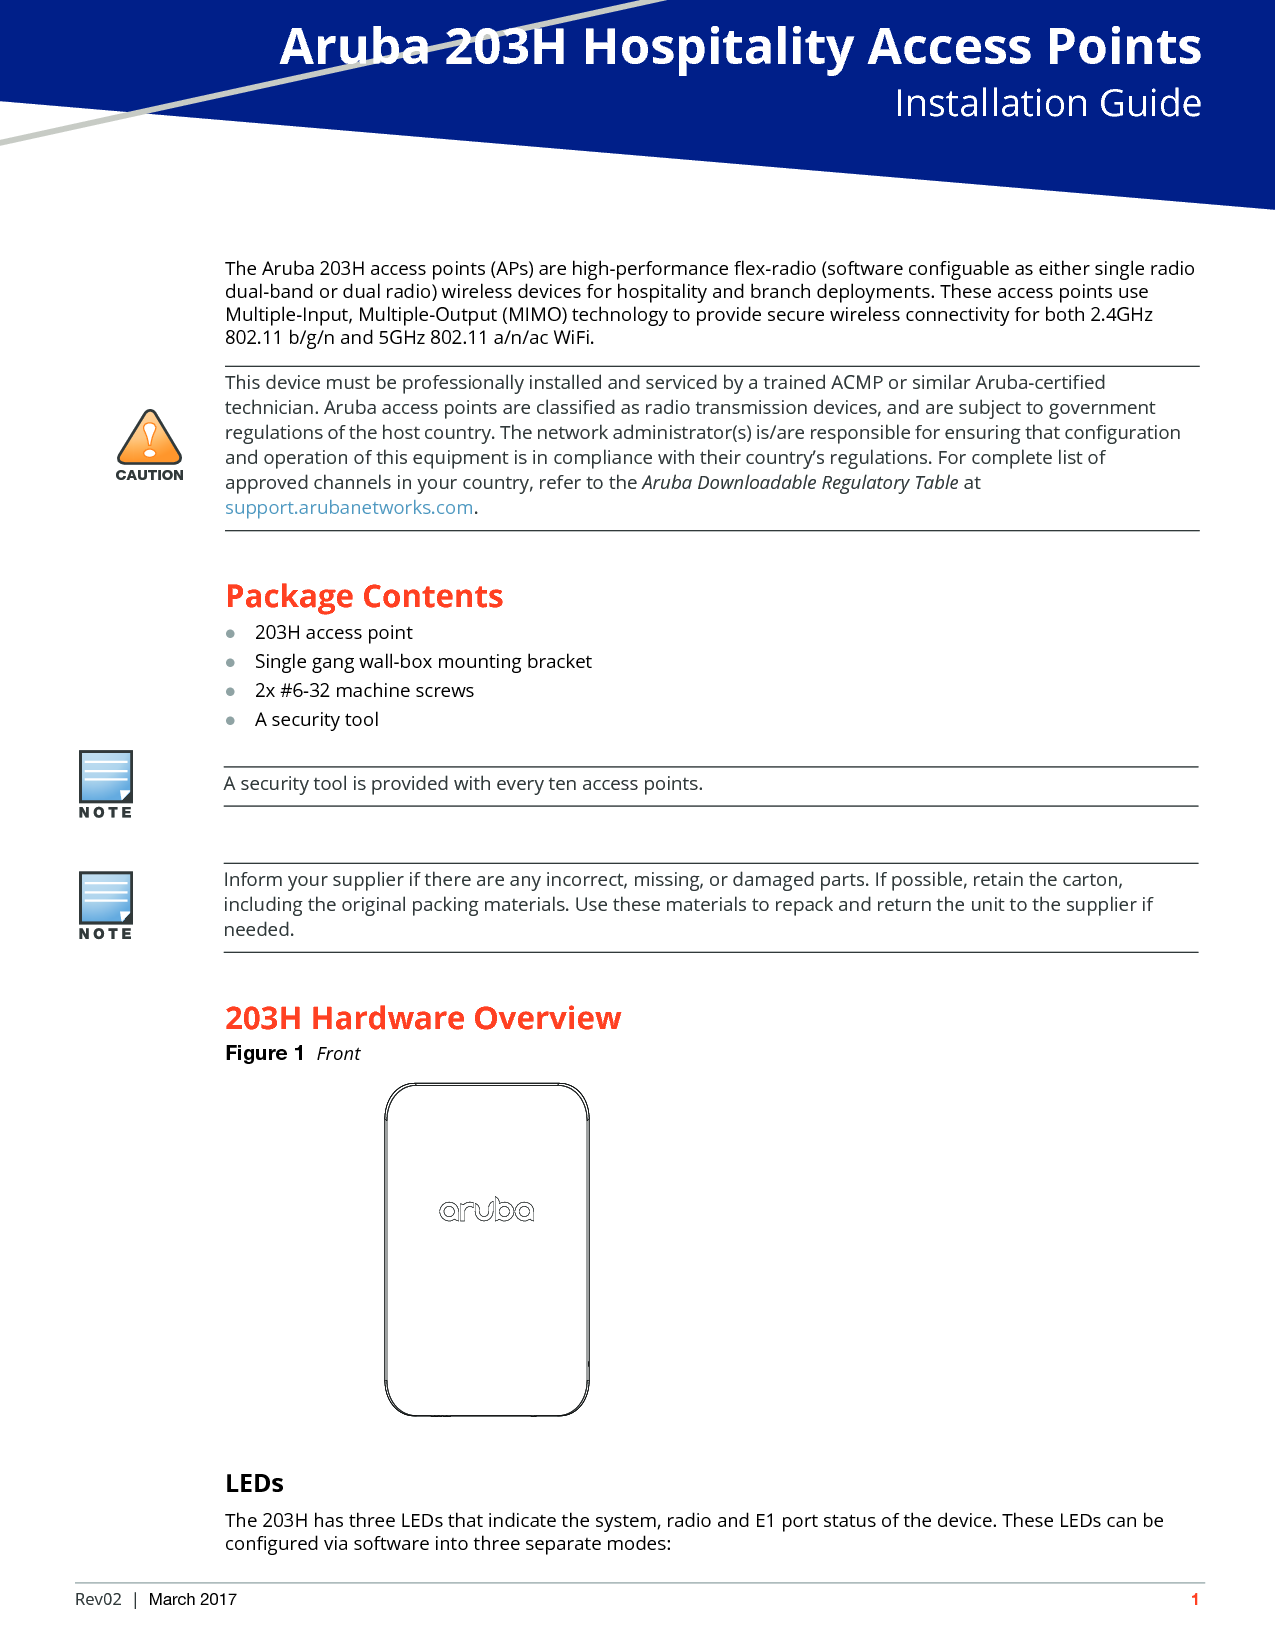 Aruba 203H Hospitality Access PointsInstallation GuideRev02 | March 2017 1The Aruba 203H access points (APs) are high-performance flex-radio (software configuable as either single radio dual-band or dual radio) wireless devices for hospitality and branch deployments. These access points use Multiple-Input, Multiple-Output (MIMO) technology to provide secure wireless connectivity for both 2.4GHz 802.11 b/g/n and 5GHz 802.11 a/n/ac WiFi.Package Contents203H access pointSingle gang wall-box mounting bracket2x #6-32 machine screwsA security tool203H Hardware OverviewFigure 1  FrontLEDsThe 203H has three LEDs that indicate the system, radio and E1 port status of the device. These LEDs can be configured via software into three separate modes:!CAUTIONThis device must be professionally installed and serviced by a trained ACMP or similar Aruba-certified technician. Aruba access points are classified as radio transmission devices, and are subject to government regulations of the host country. The network administrator(s) is/are responsible for ensuring that configuration and operation of this equipment is in compliance with their country’s regulations. For complete list of approved channels in your country, refer to the Aruba Downloadable Regulatory Table at support.arubanetworks.com.A security tool is provided with every ten access points. Inform your supplier if there are any incorrect, missing, or damaged parts. If possible, retain the carton, including the original packing materials. Use these materials to repack and return the unit to the supplier if needed.